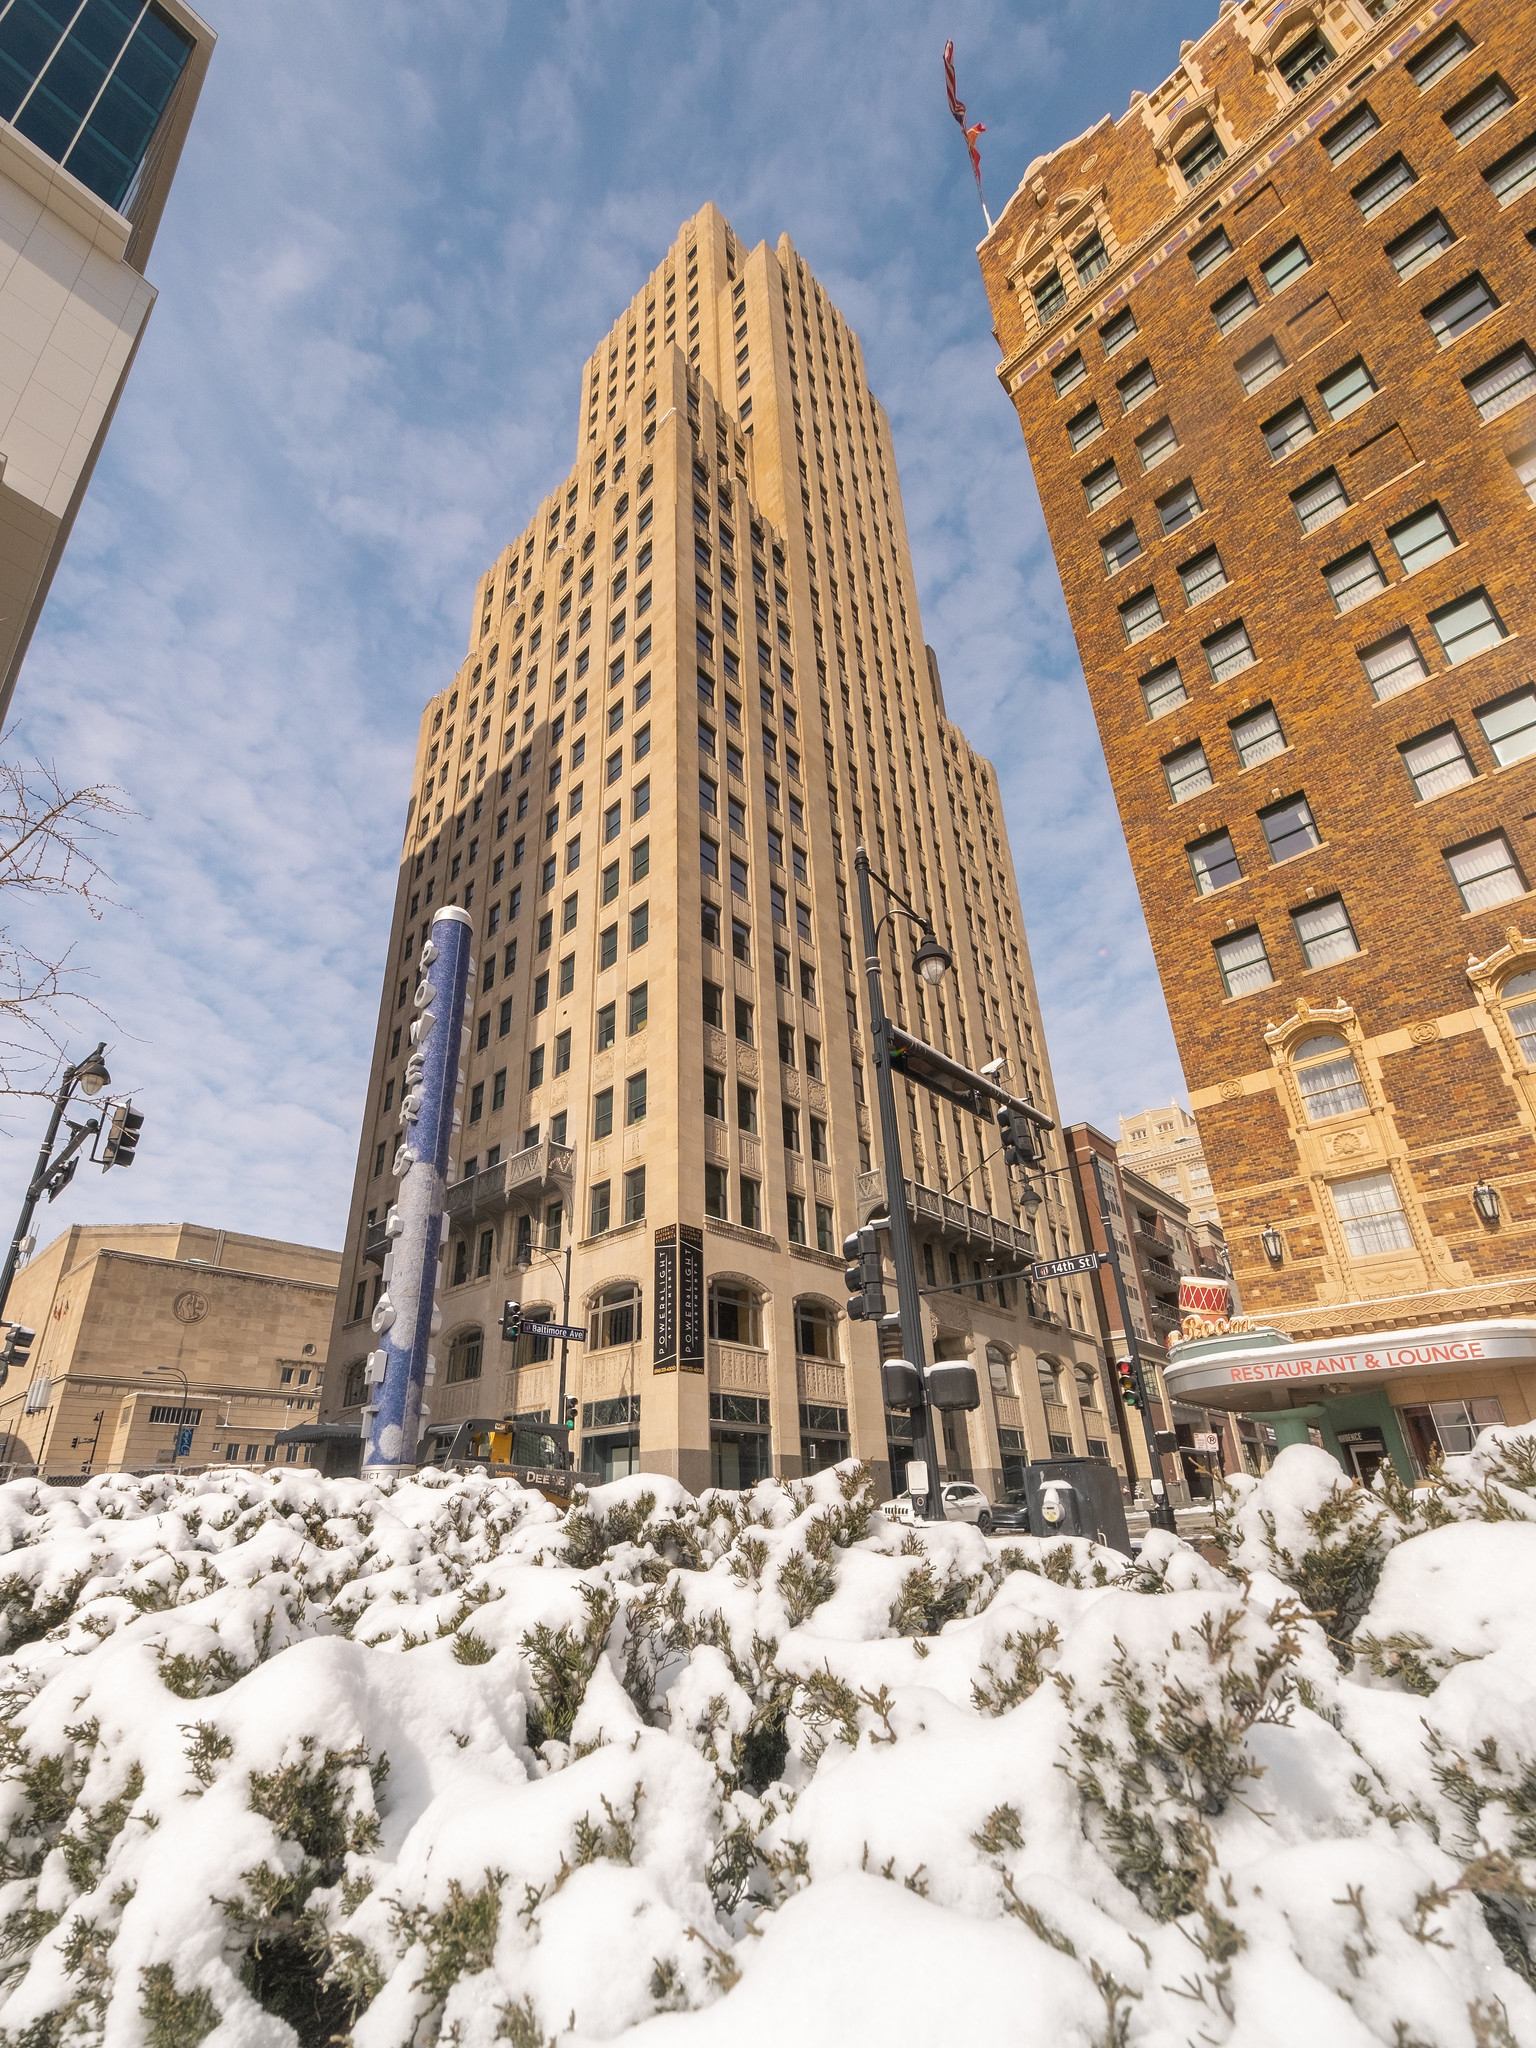 The Power and Light building opened in 1931 as a way to boost the local economy by providing jobs and was the tallest building in Missouri for nearly 50 years.